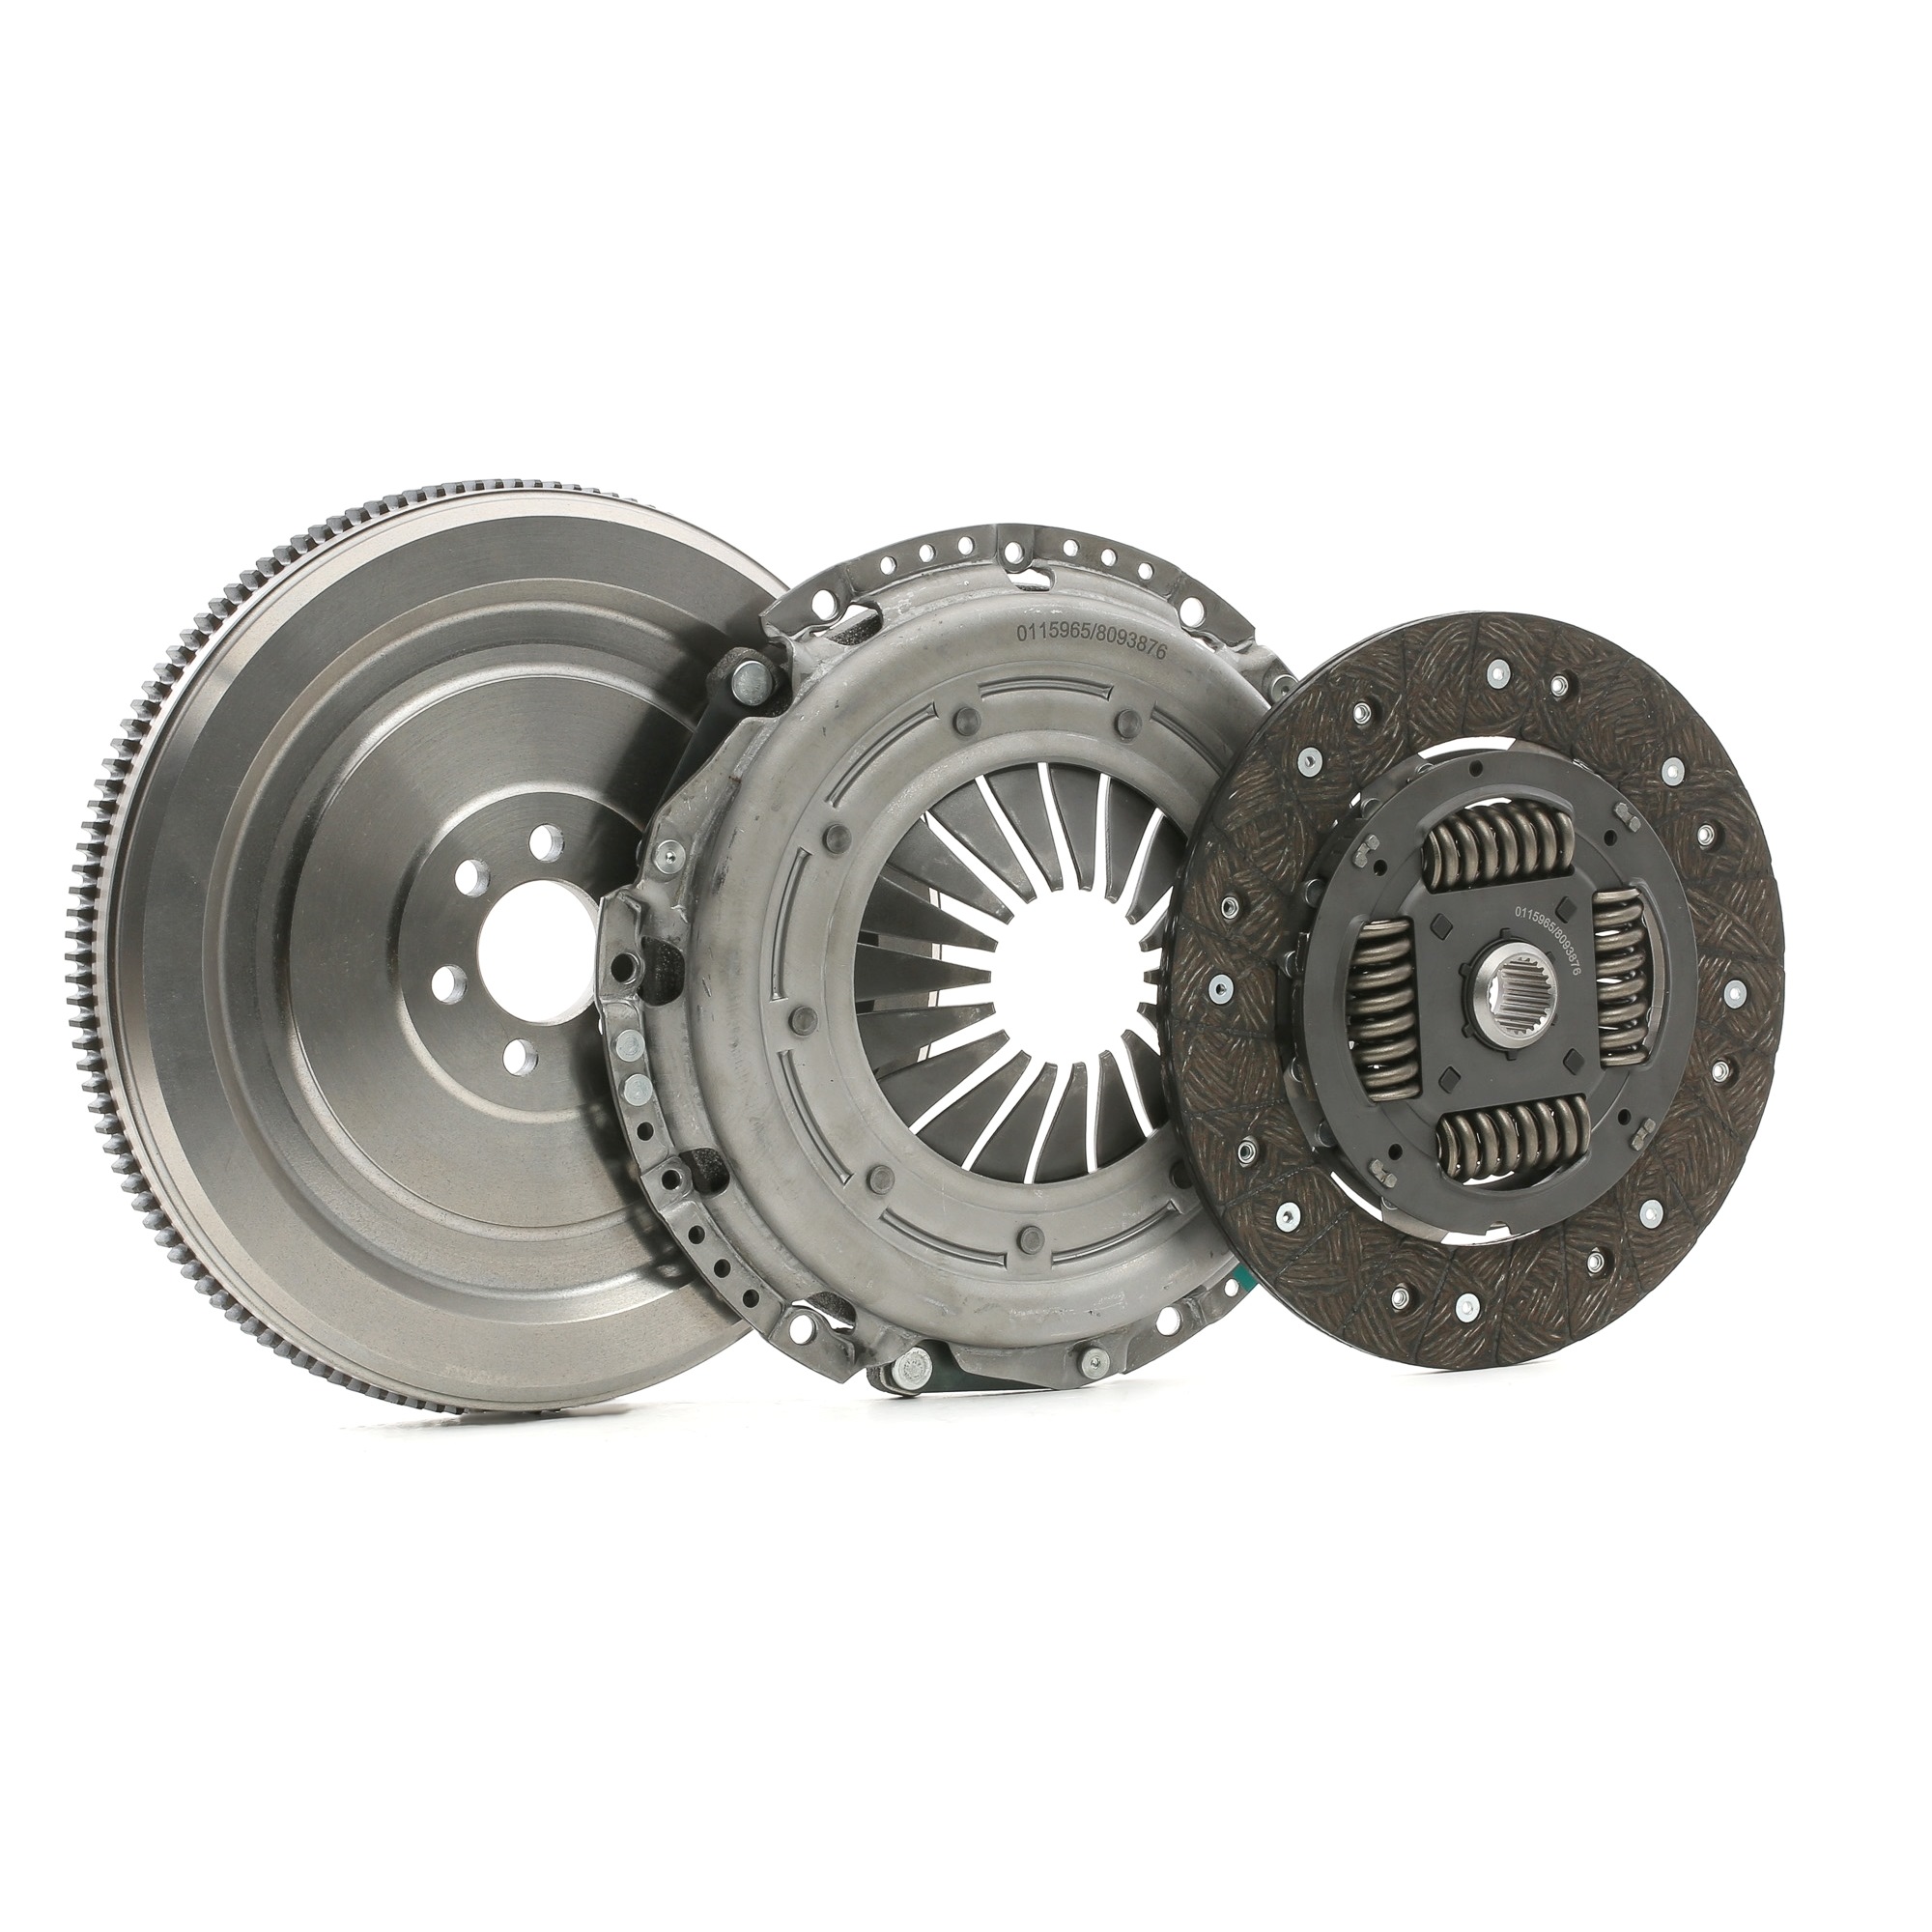 Original SKCK-0100107 STARK Clutch kit experience and price